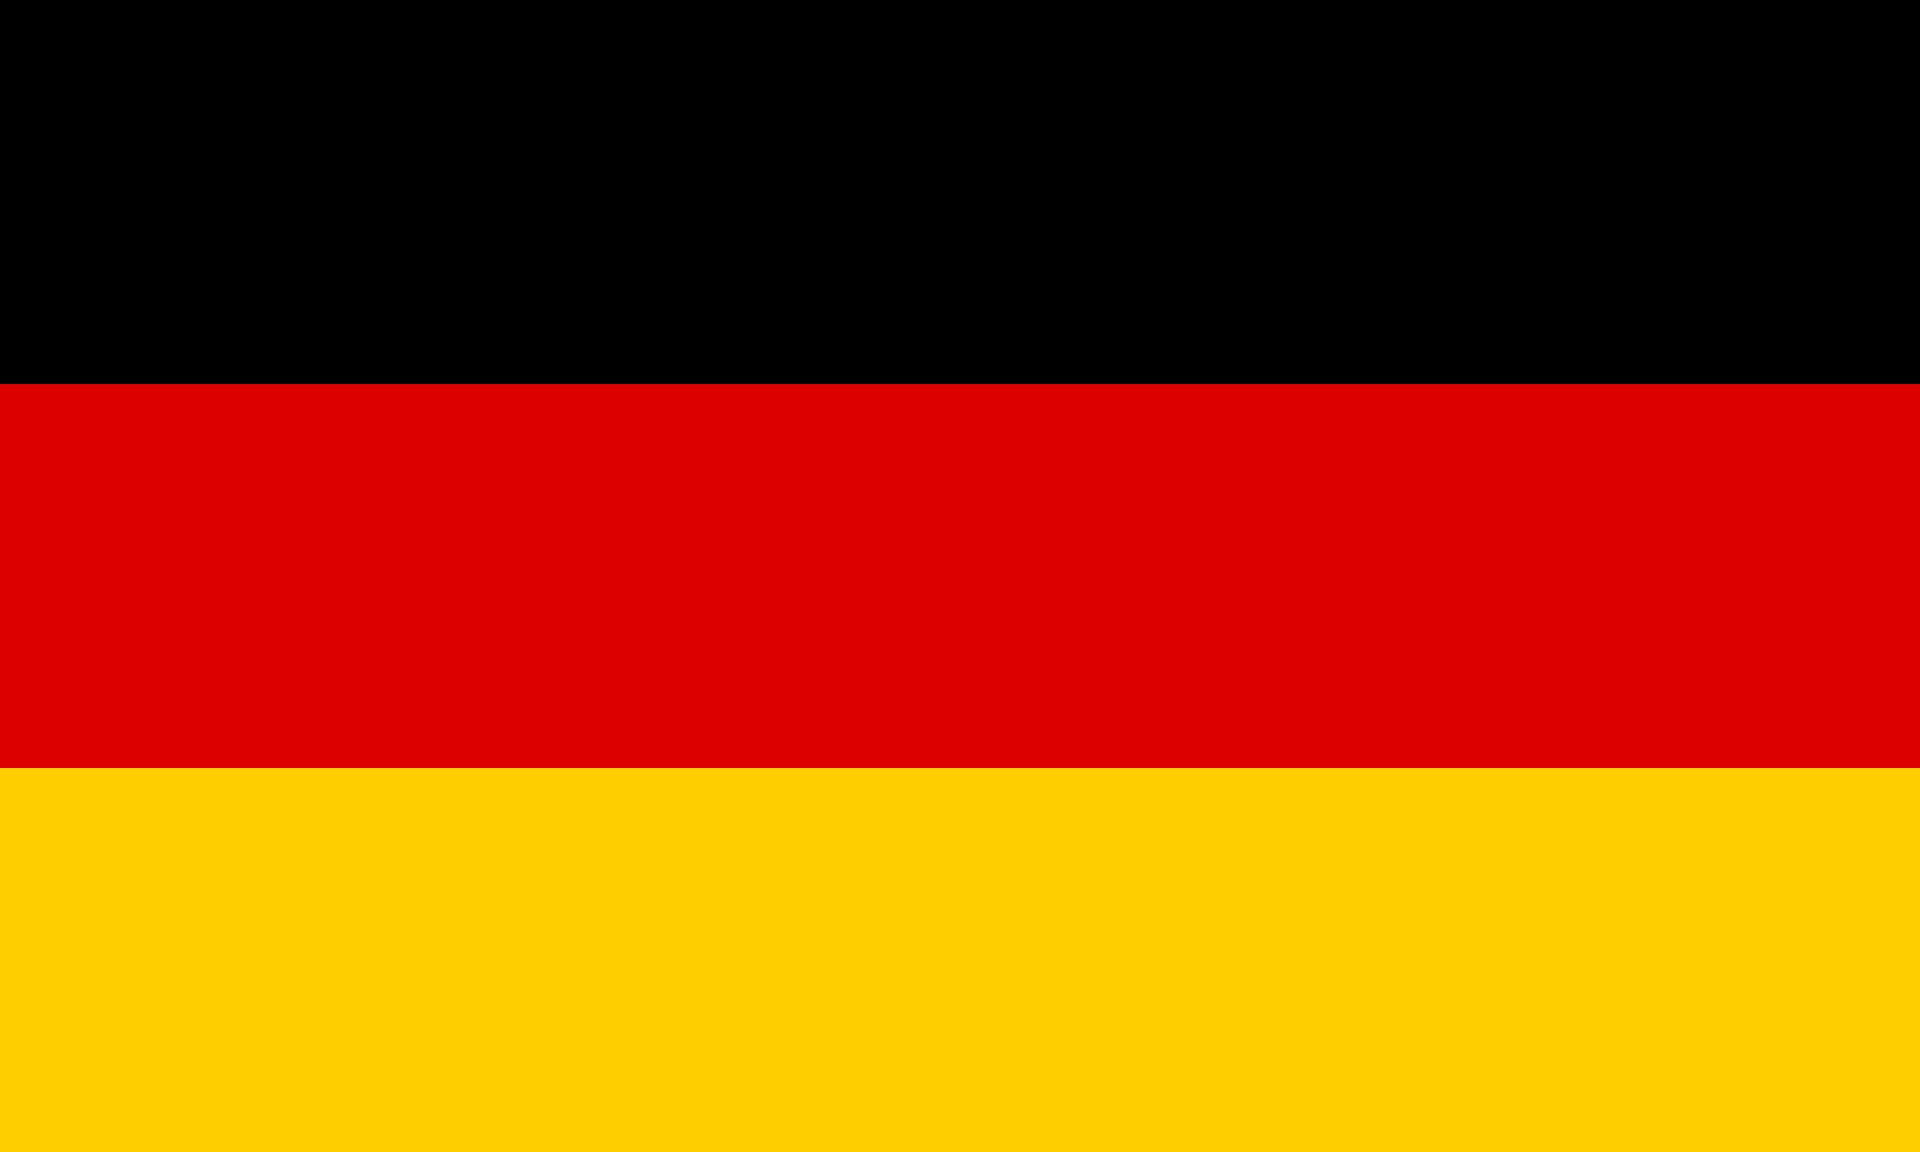 Payment blockings not a solution to flaws in Germany's online gambling regulation - more fundamental rethink needed